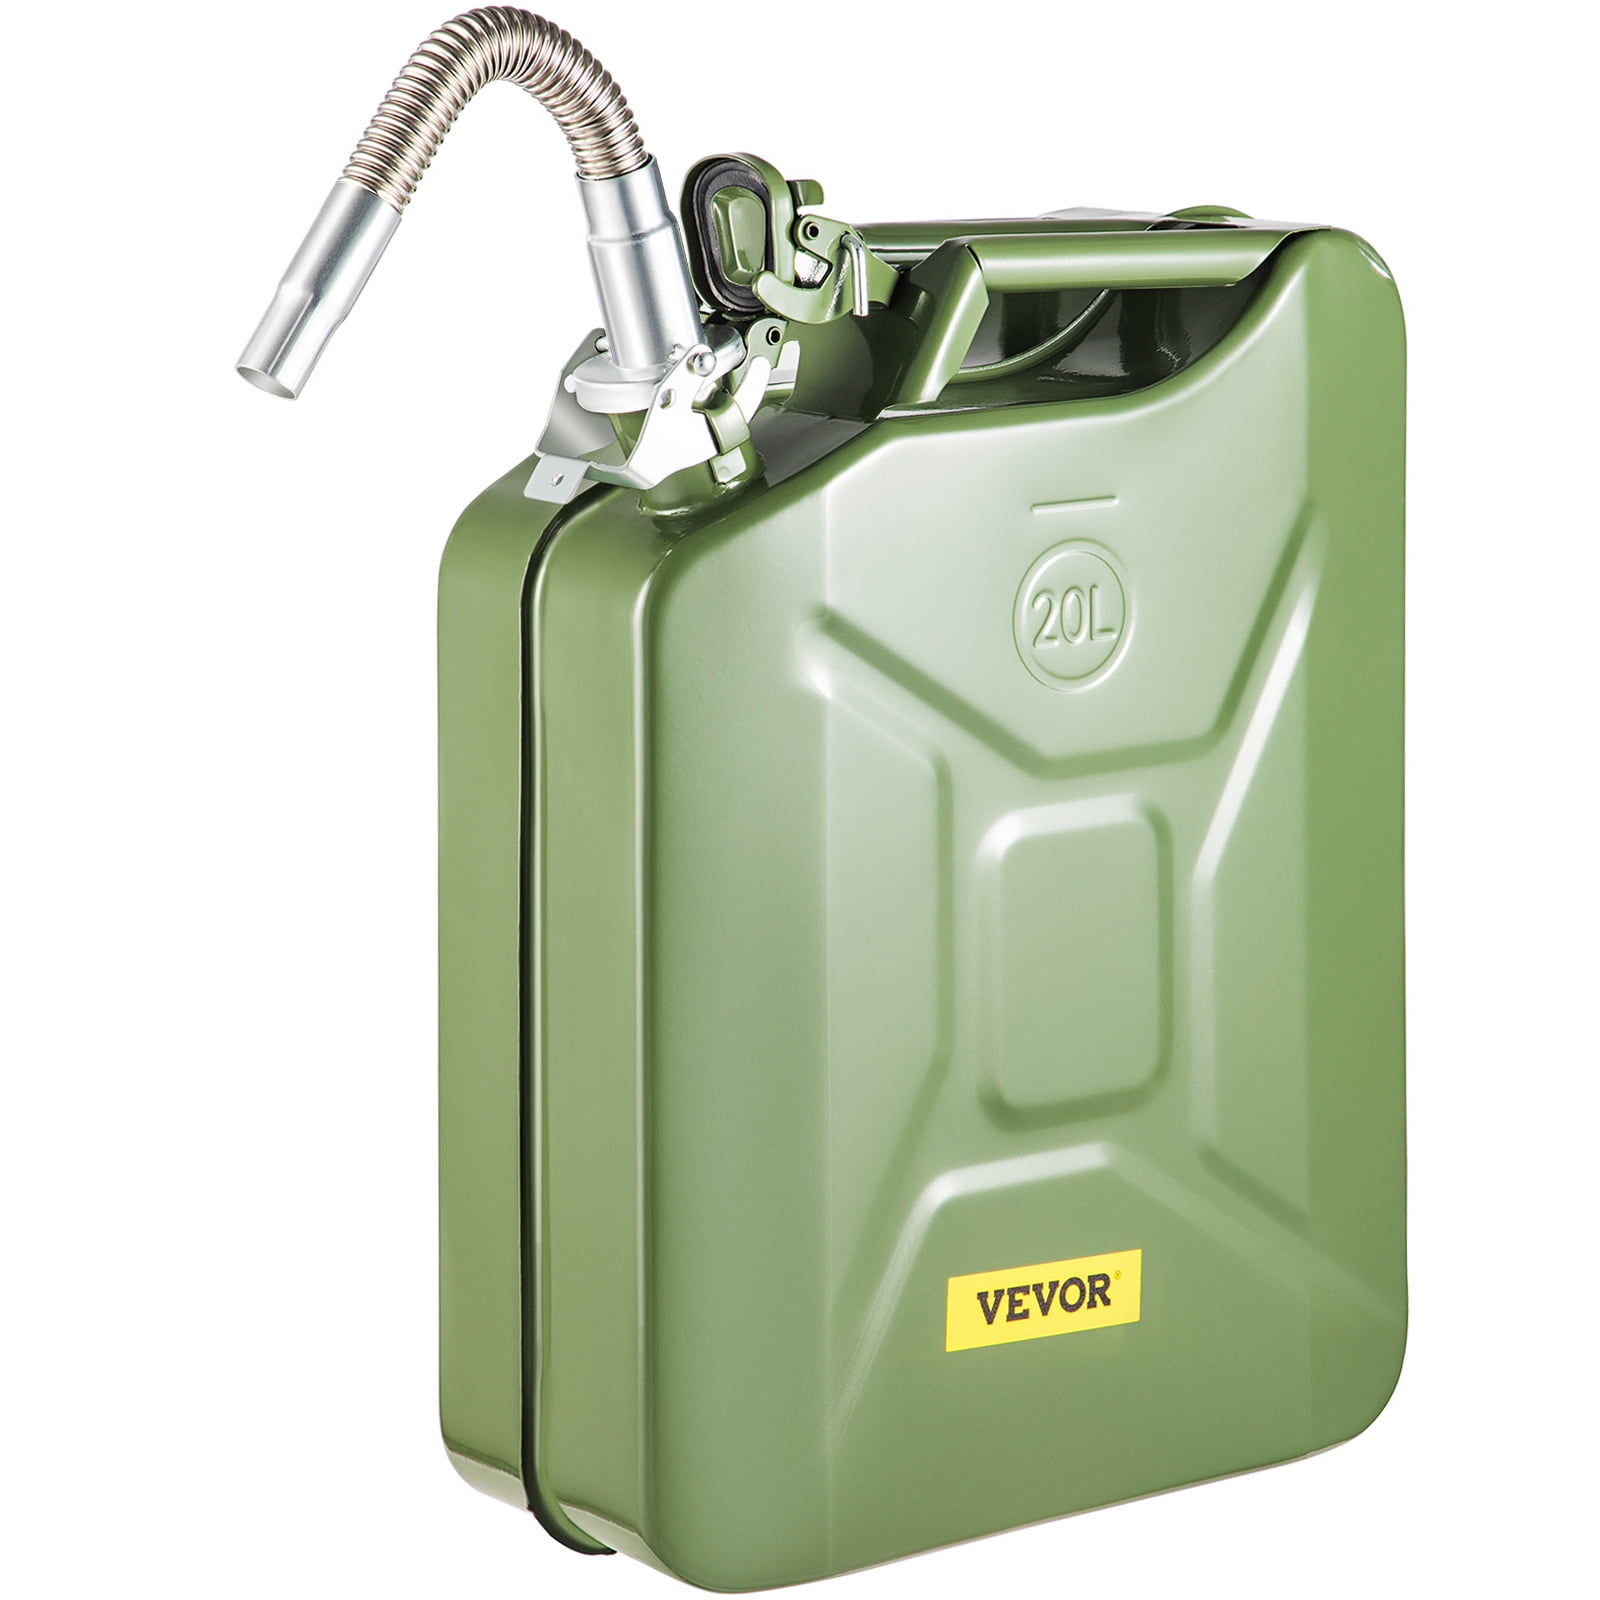 5 Gallon Gal 20L Liter Jerry Can Backup Steel Tank Fuel Gas Gasoline Green 